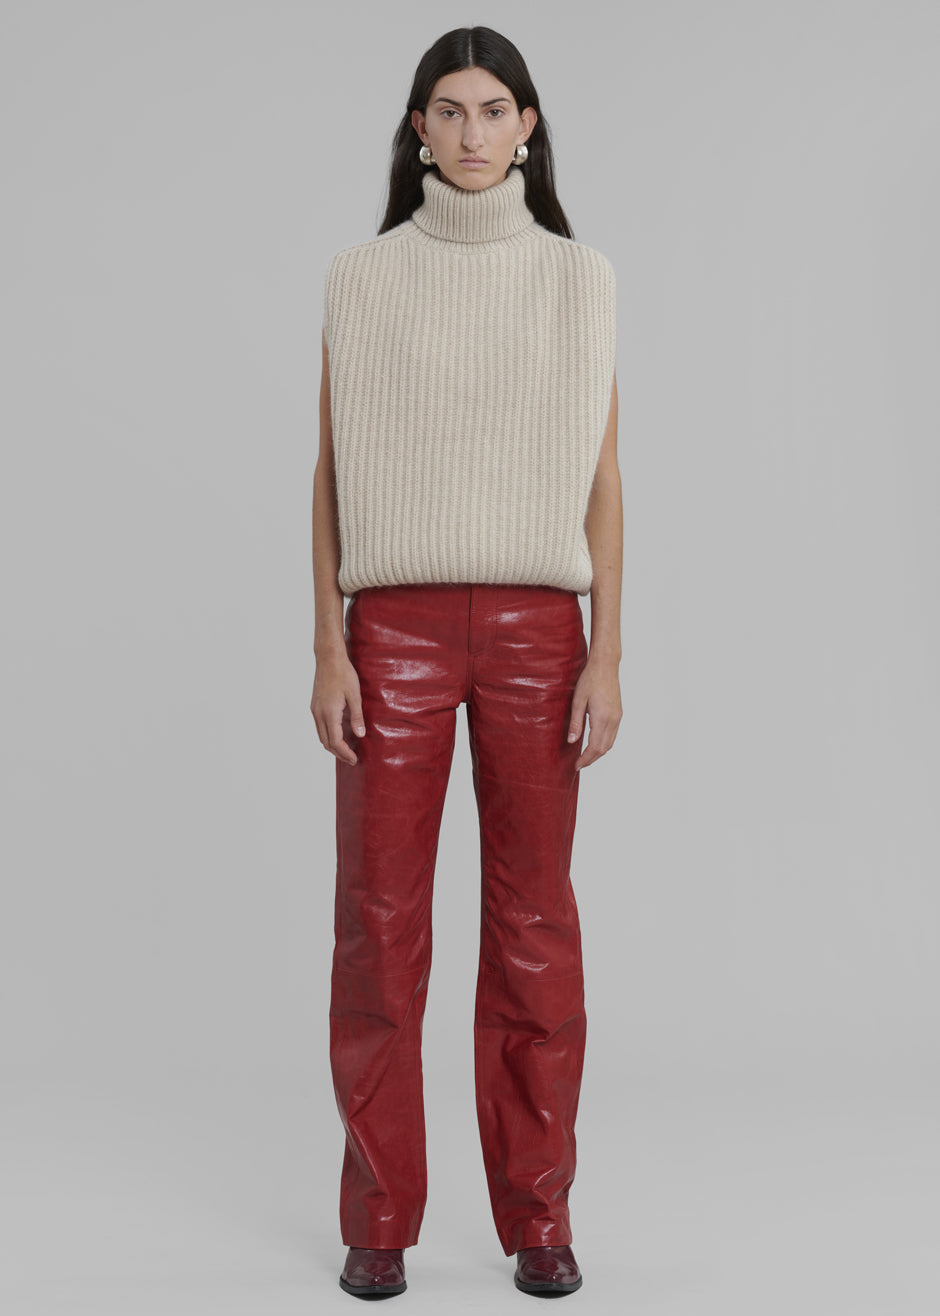 REMAIN Pants Crunchy Leather - Chili Pepper - 5